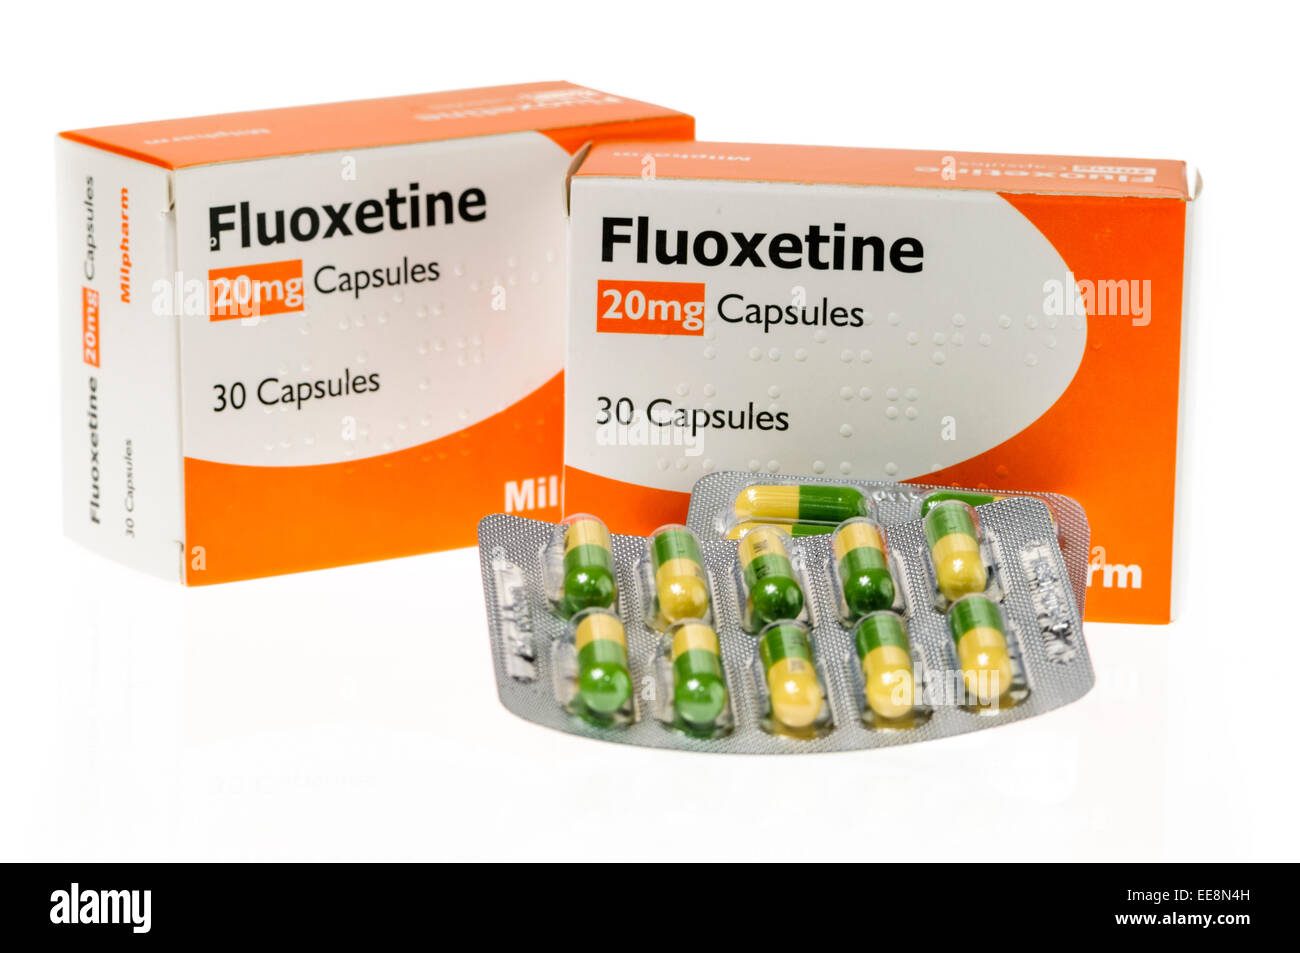 Fluoxetine, a selective seratonin reuptake inhibitor (SSRI used in the treatment of major depression. Stock Photo